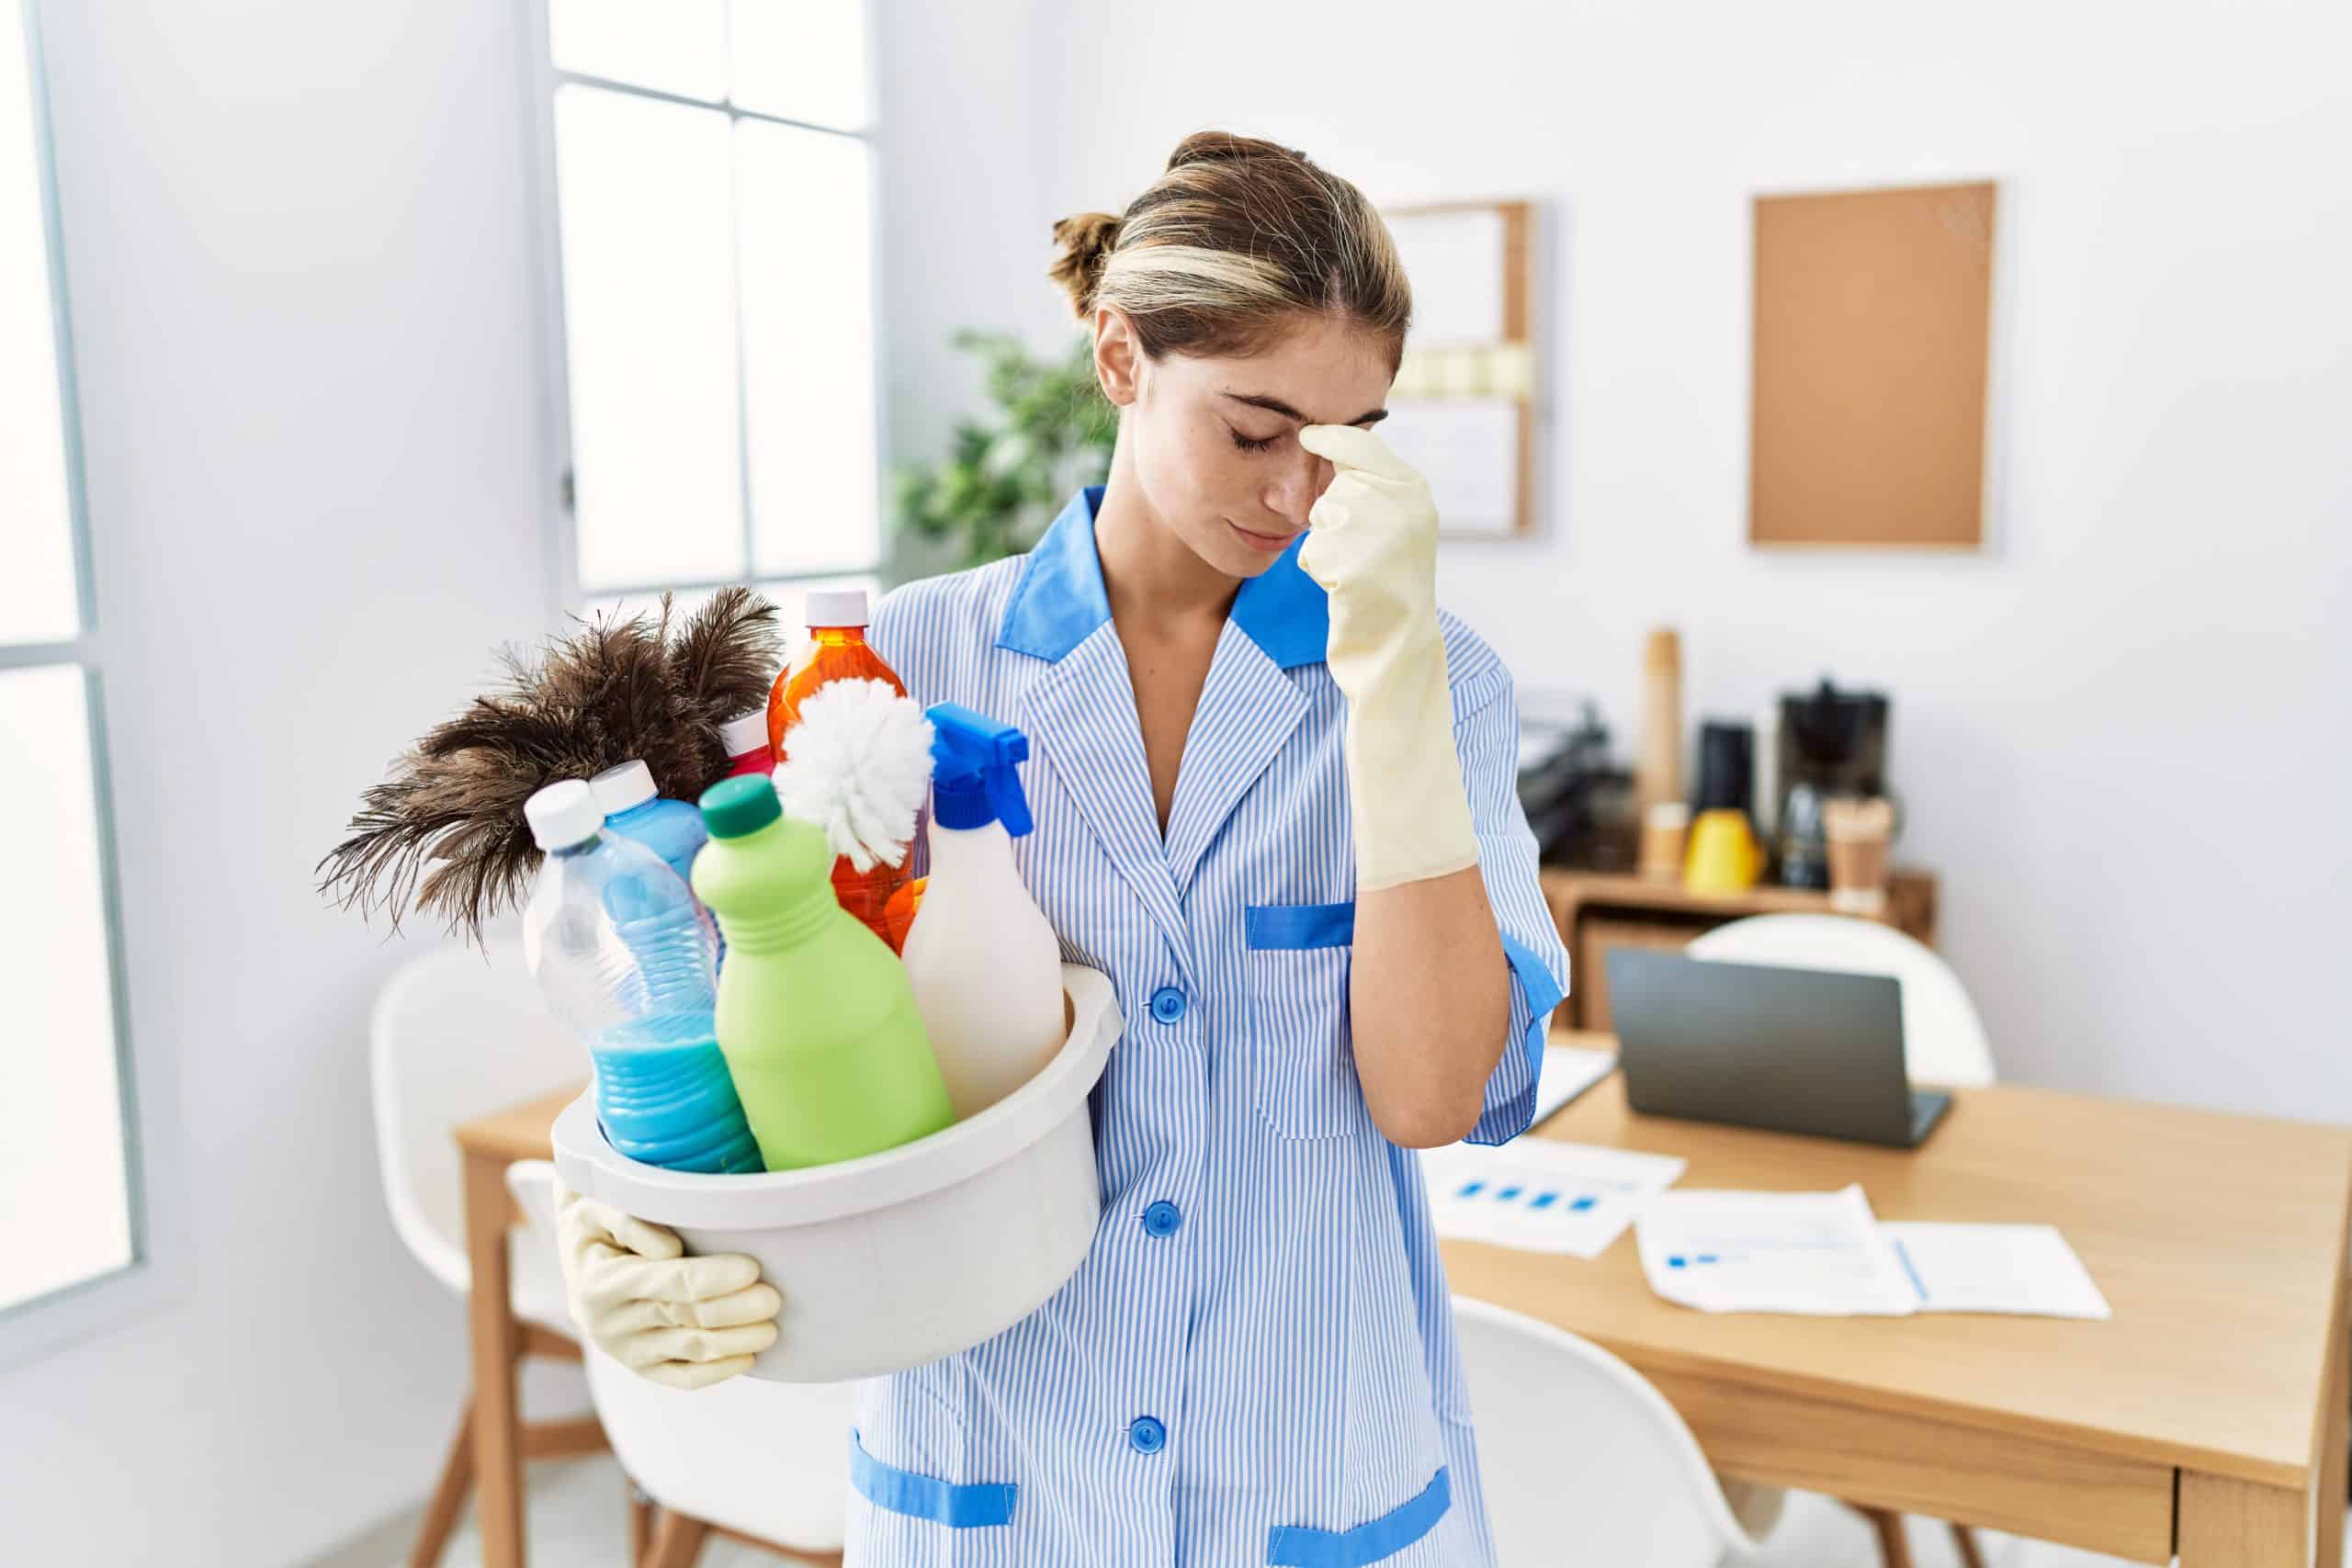 Toxins In Cleaning Products